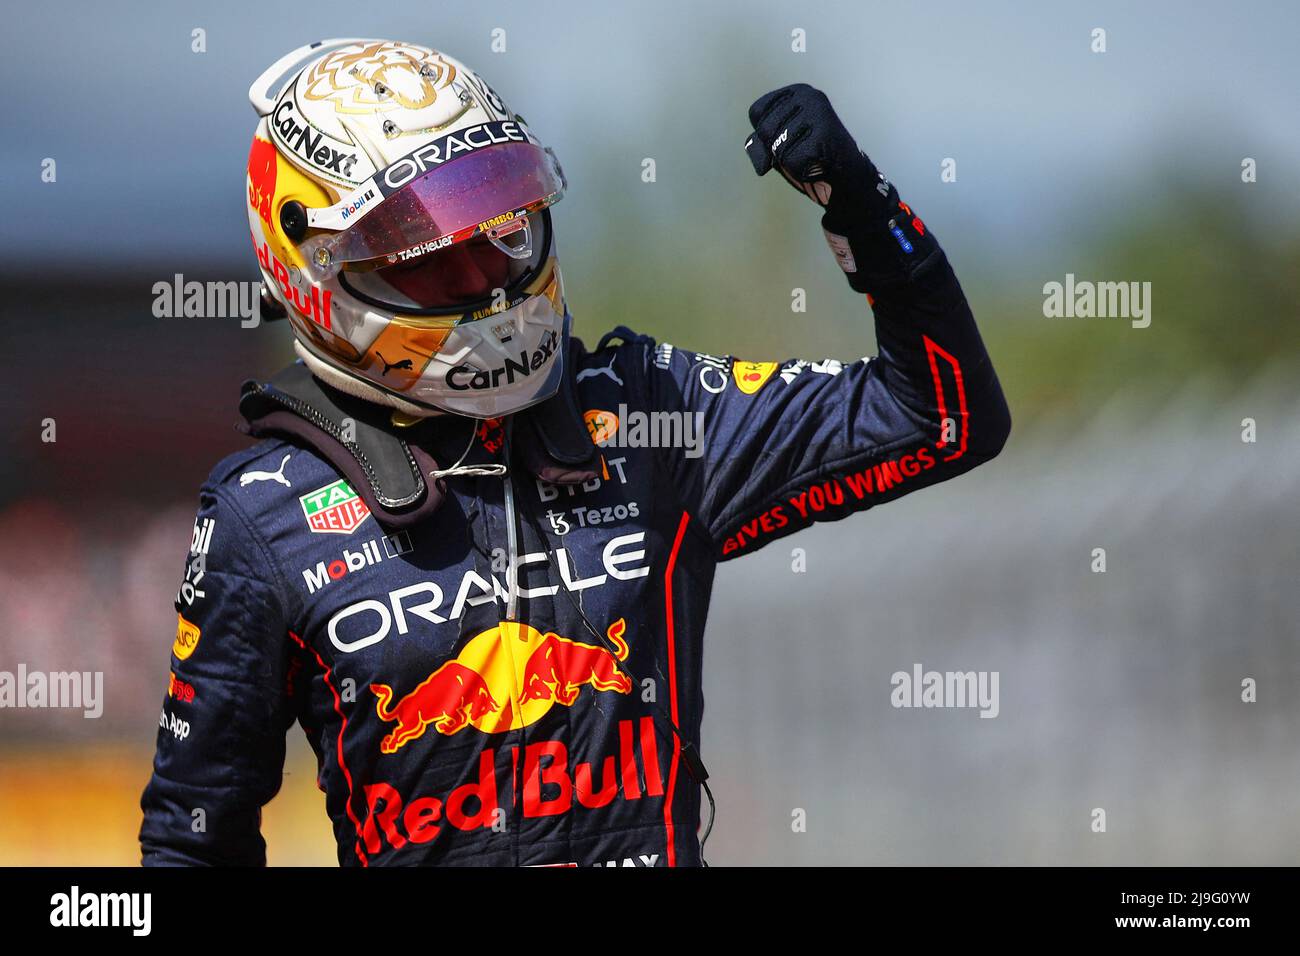 Max Verstappen of Holland and team Red Bull, the winner during F1 Spanish Grand Prix in Barcelona, Spain on May 22, 2022. Photo by Giuliano Bevilacqua/ABACAPRESS.COM Stock Photo